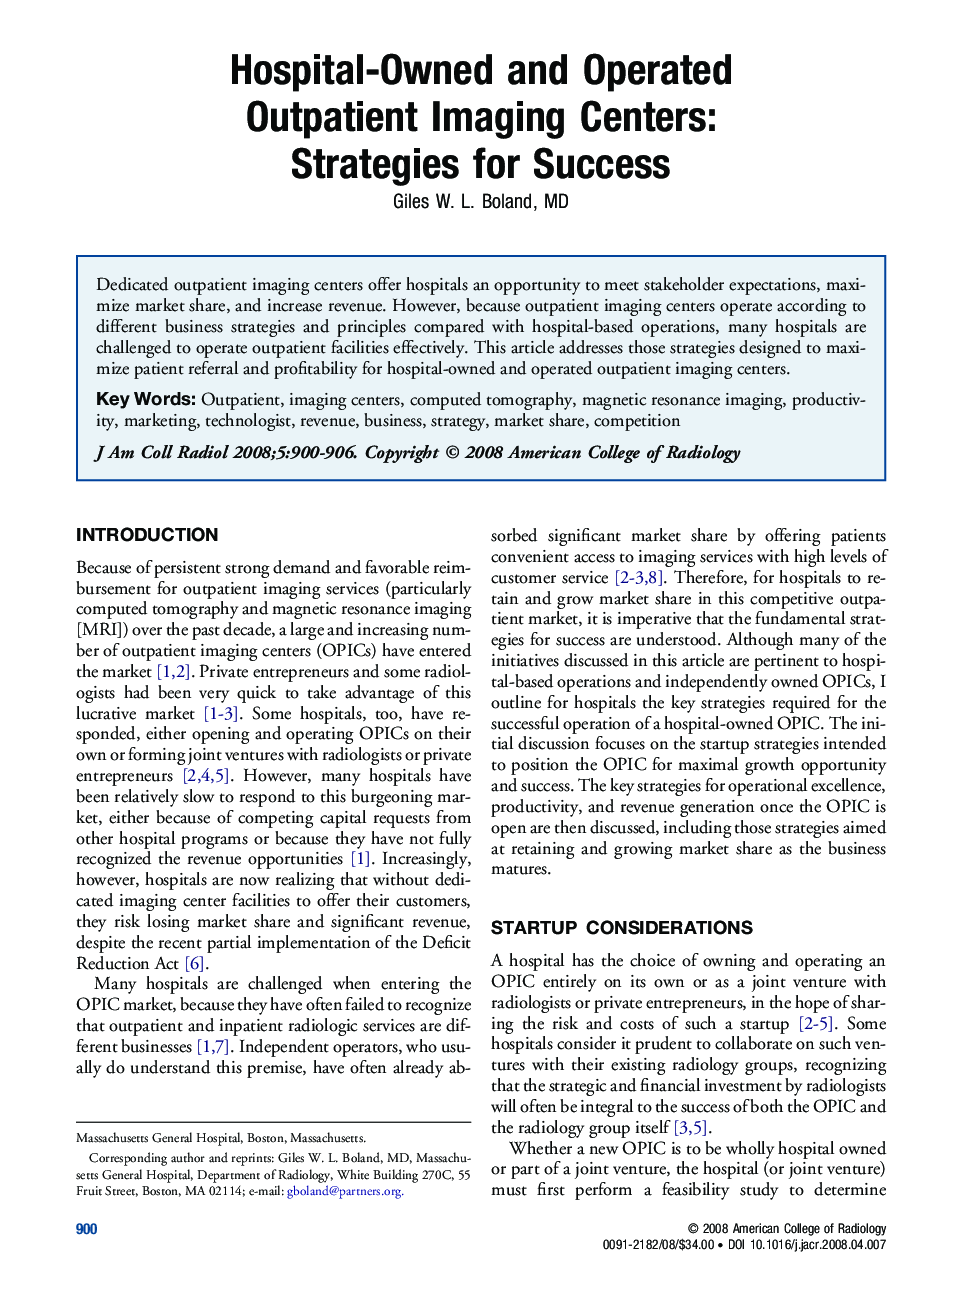 Hospital-Owned and Operated Outpatient Imaging Centers: Strategies for Success